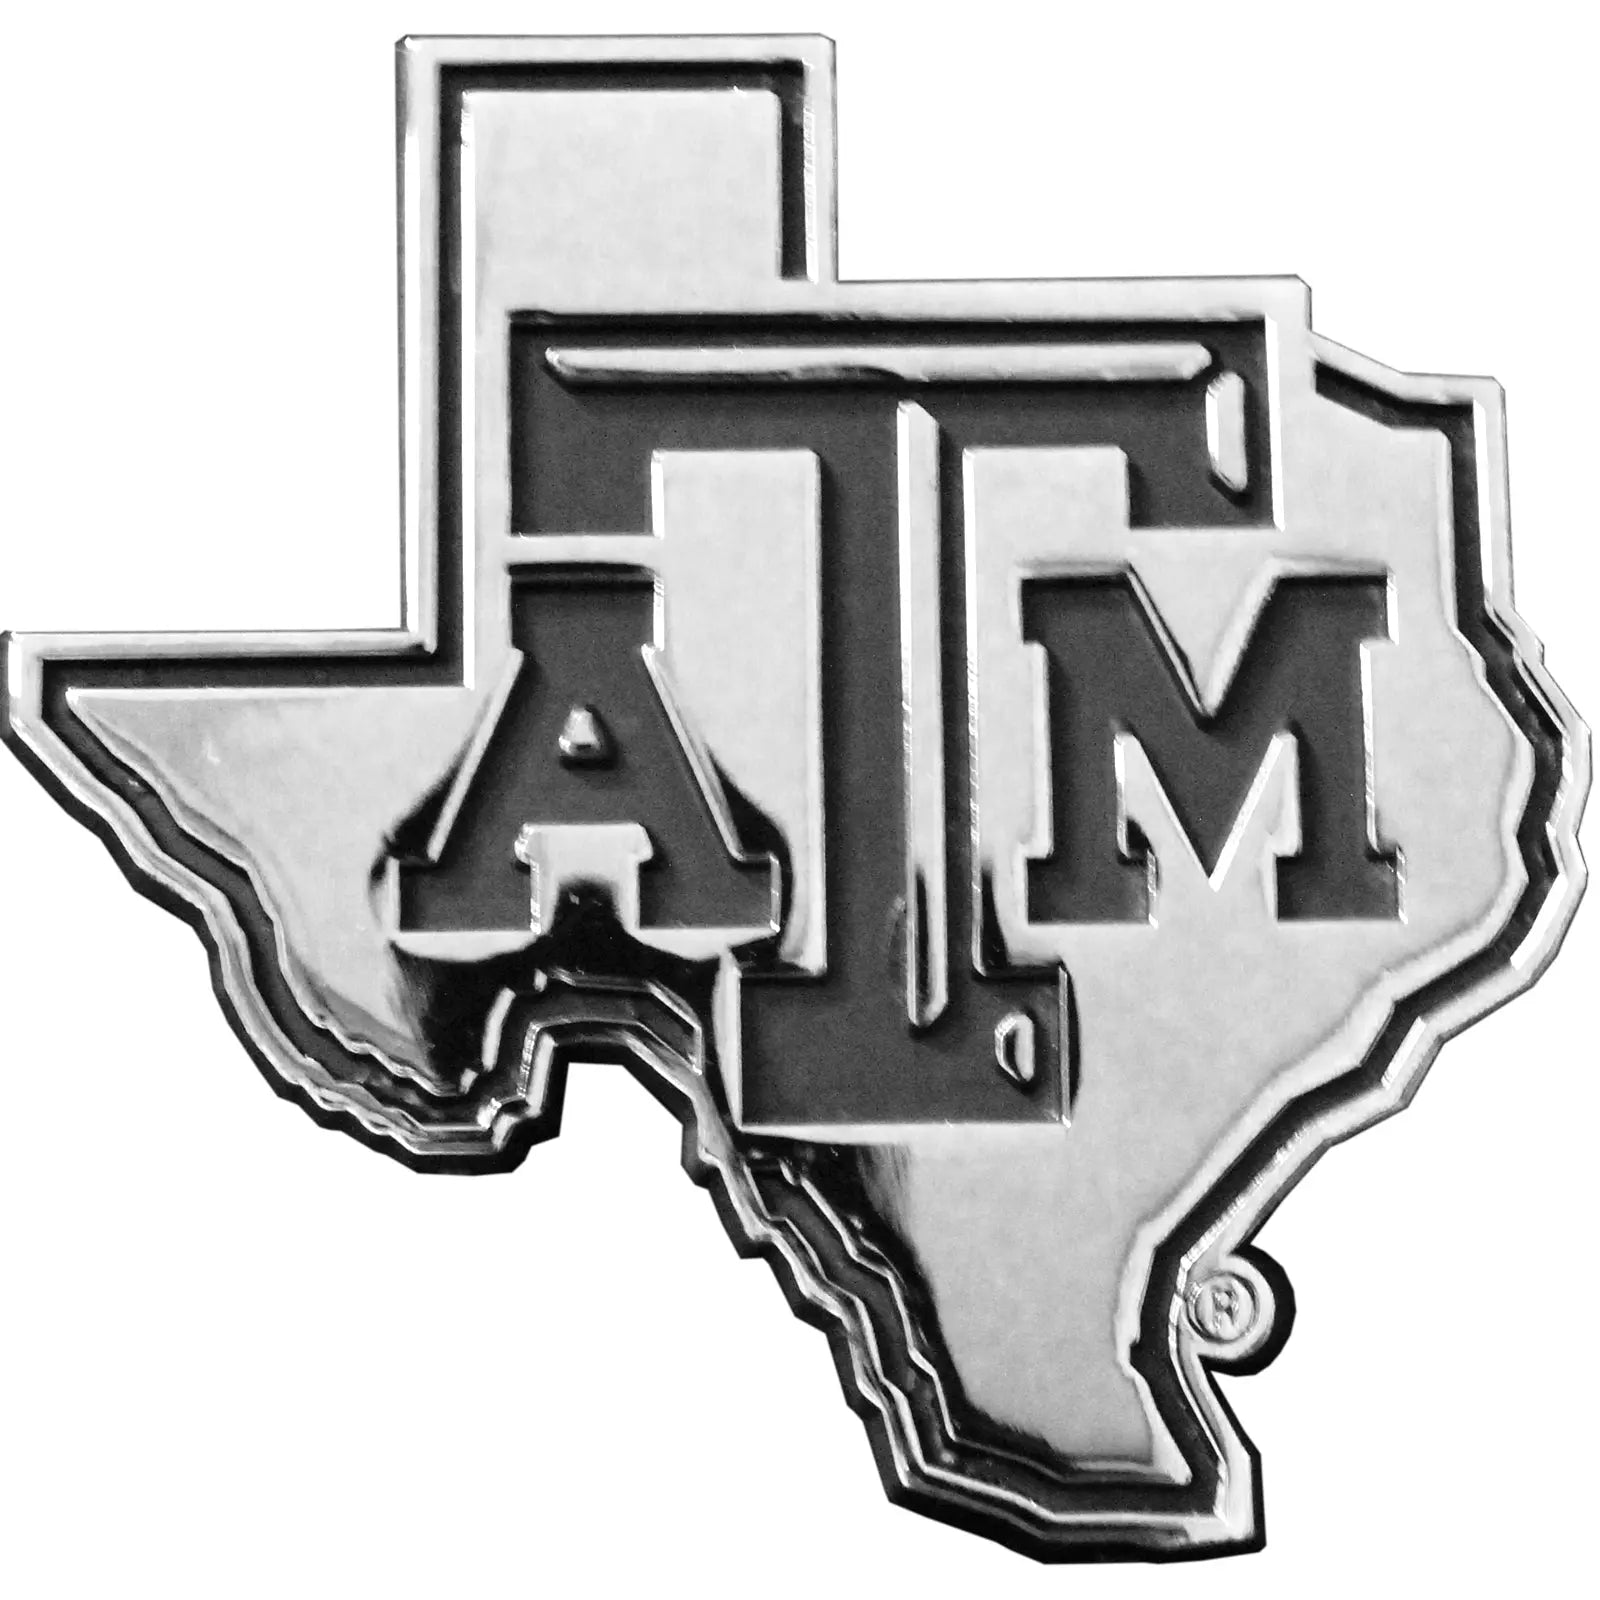 Texas A&M Aggies State 'ATM' Solid Metal Auto Emblem 